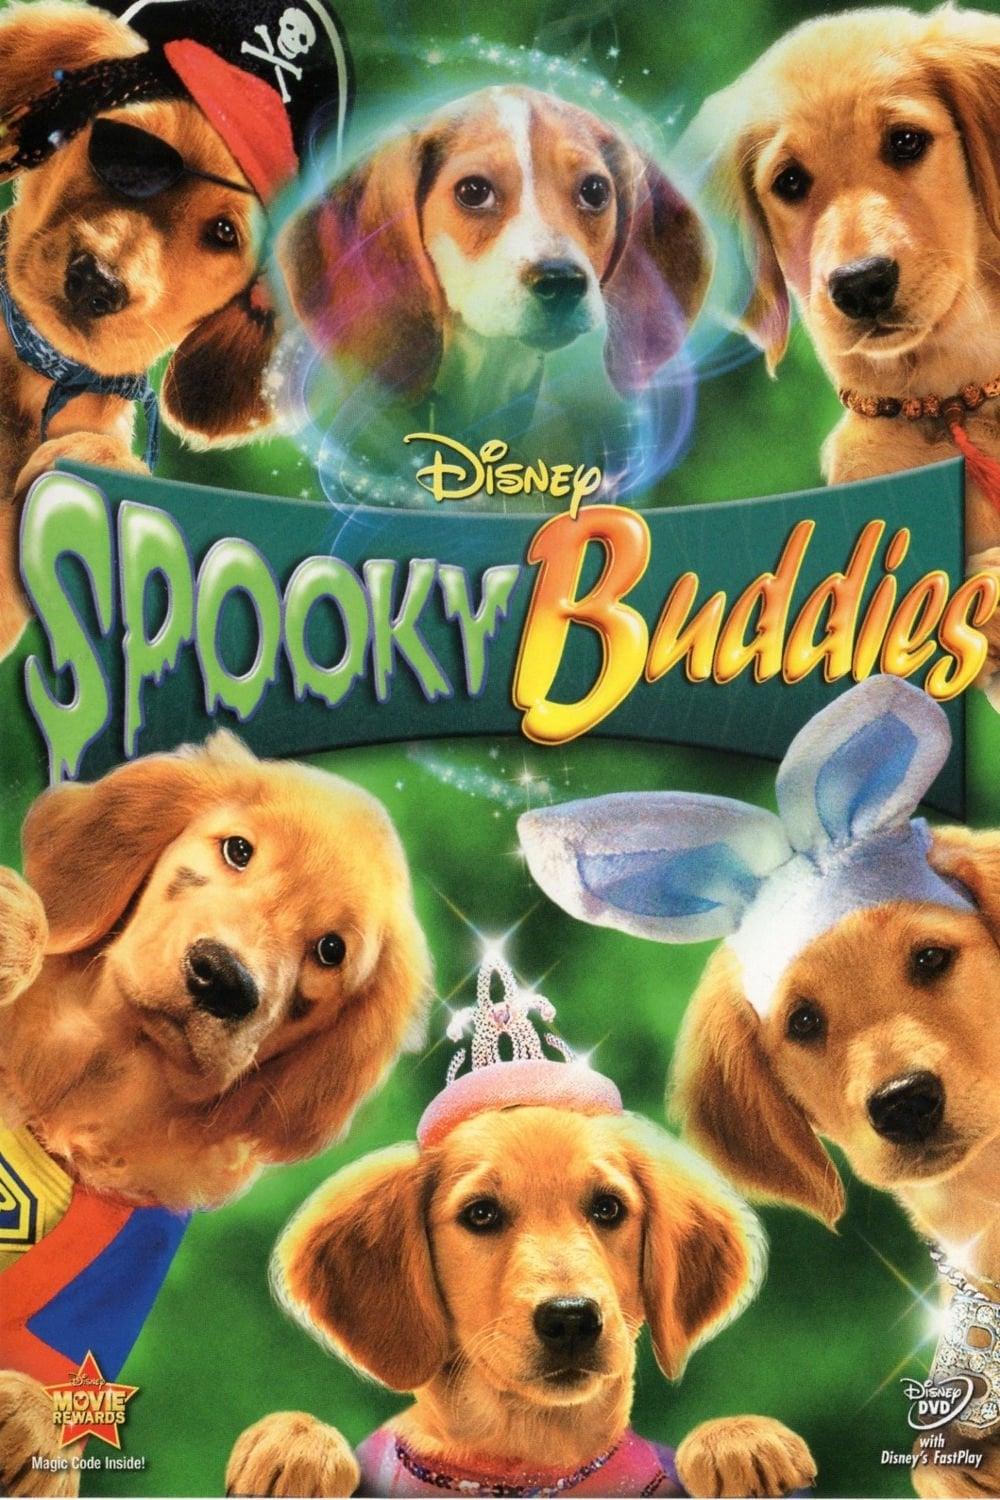 Spooky Buddies poster